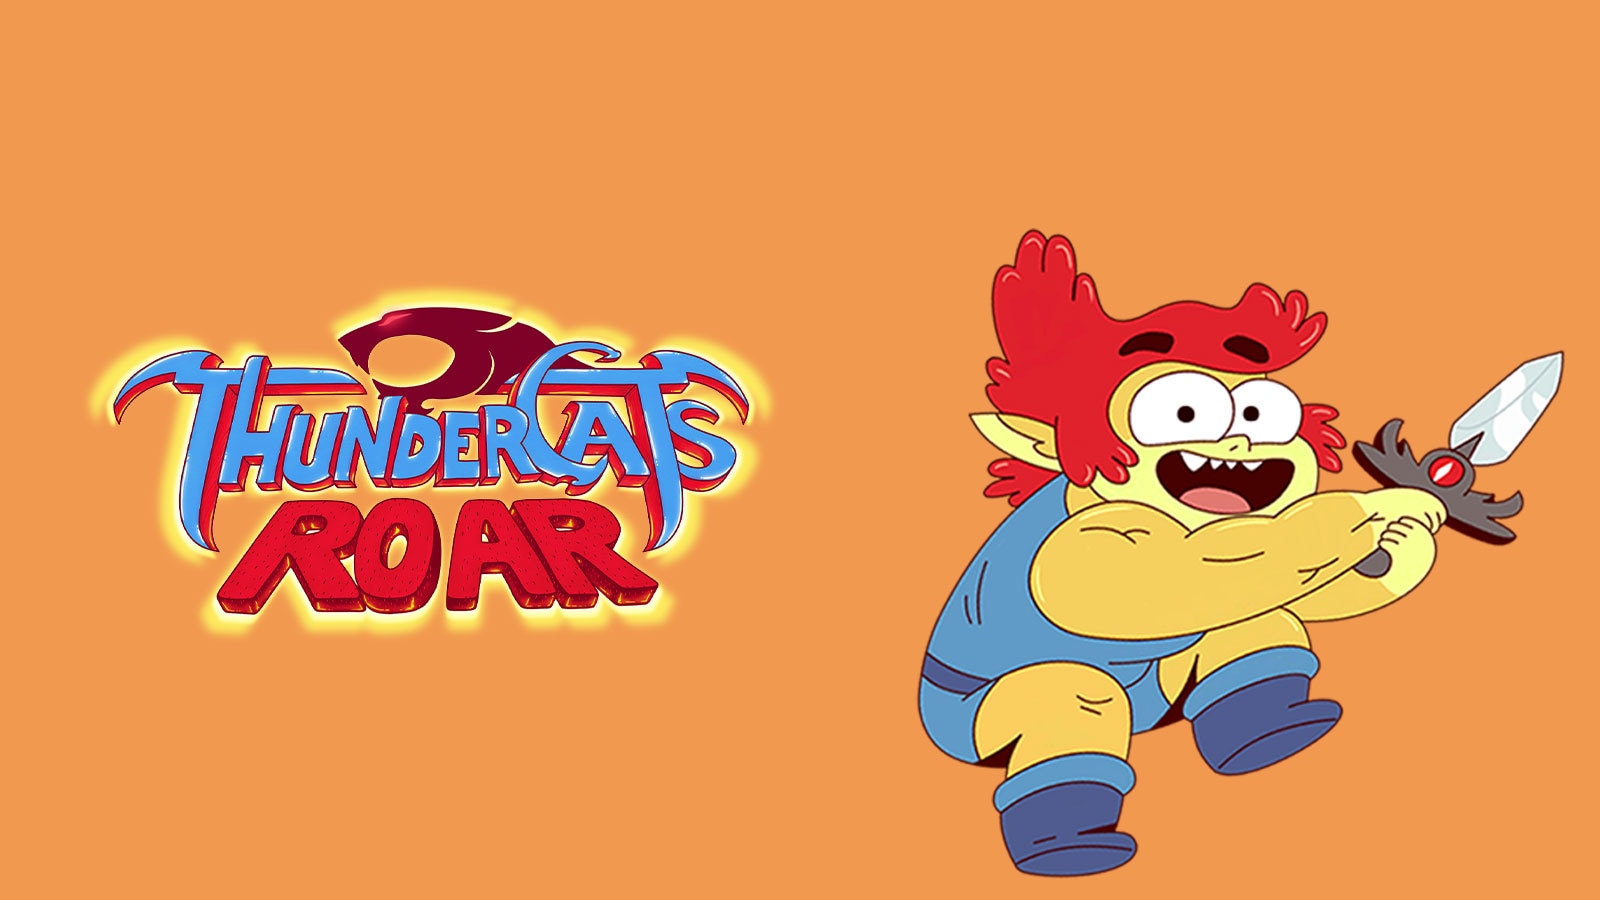 when is the new thundercats cartoon coming out